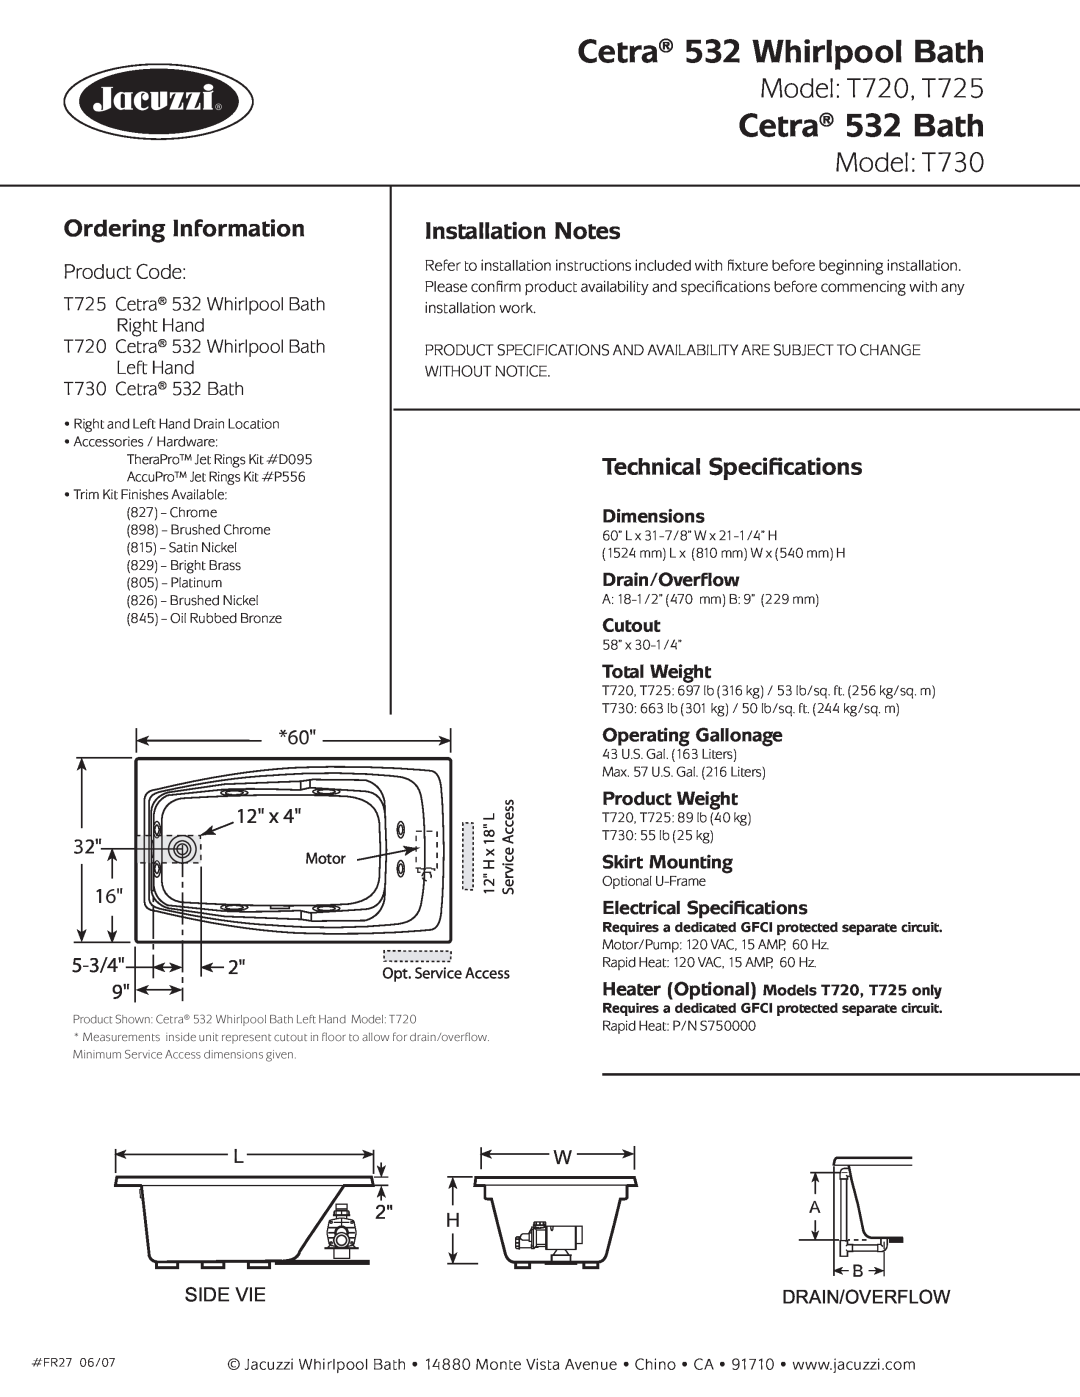 Jacuzzi Cetra 532 Whirlpool Bath, Cetra 532 Bath, Model T720, T725, Model T730, Ordering Information, Product Code 